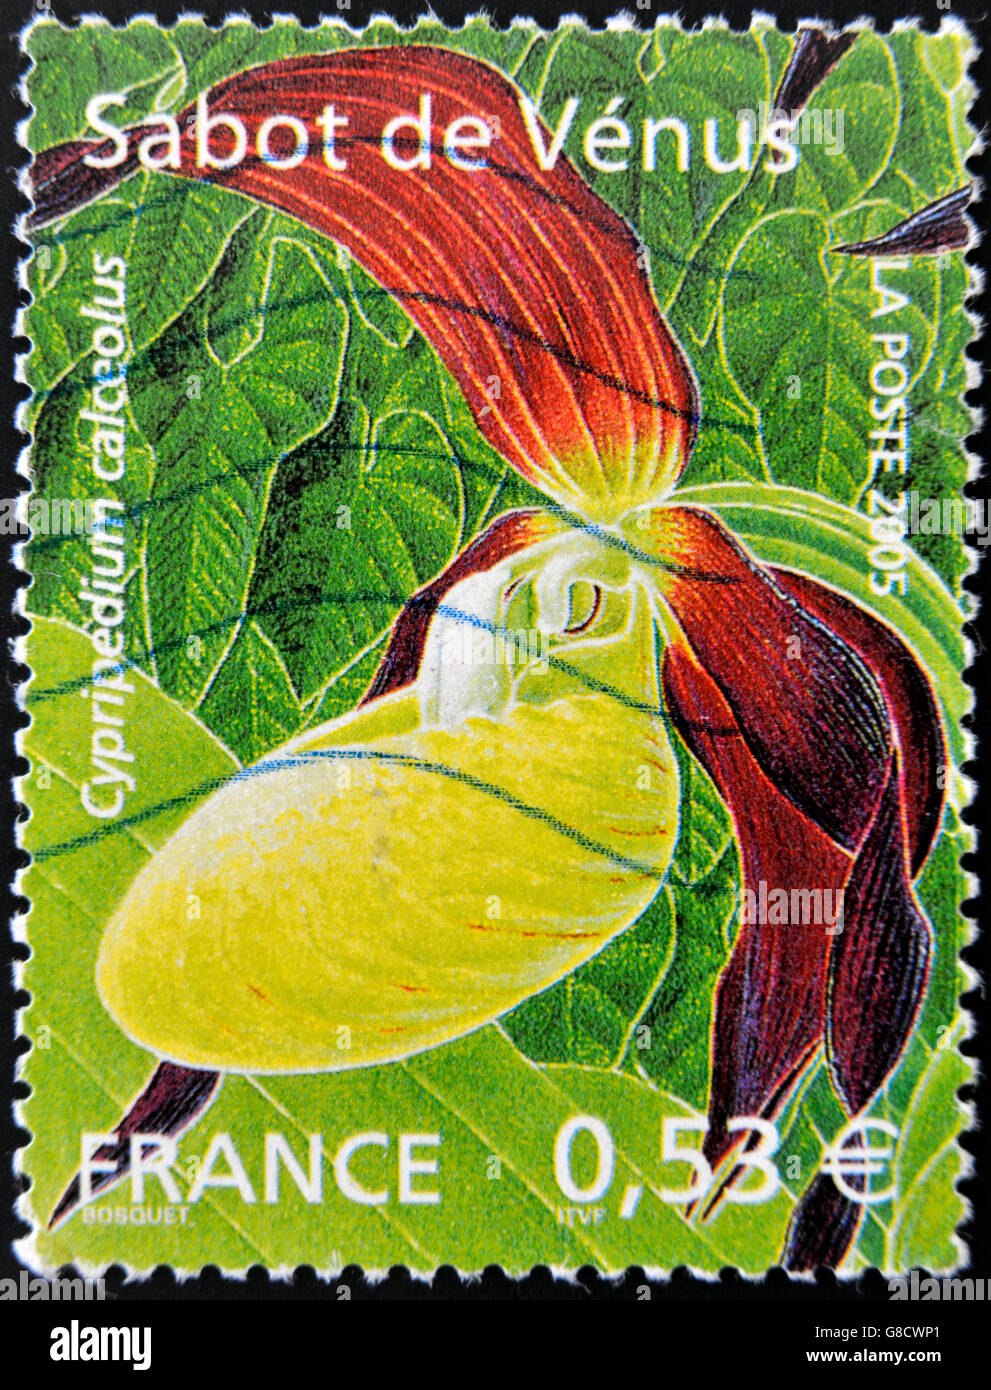 FRANCE - CIRCA 2005: A stamp printed in rance shows a Cypripedium calceolus orchid, circa 2005 Stock Photo